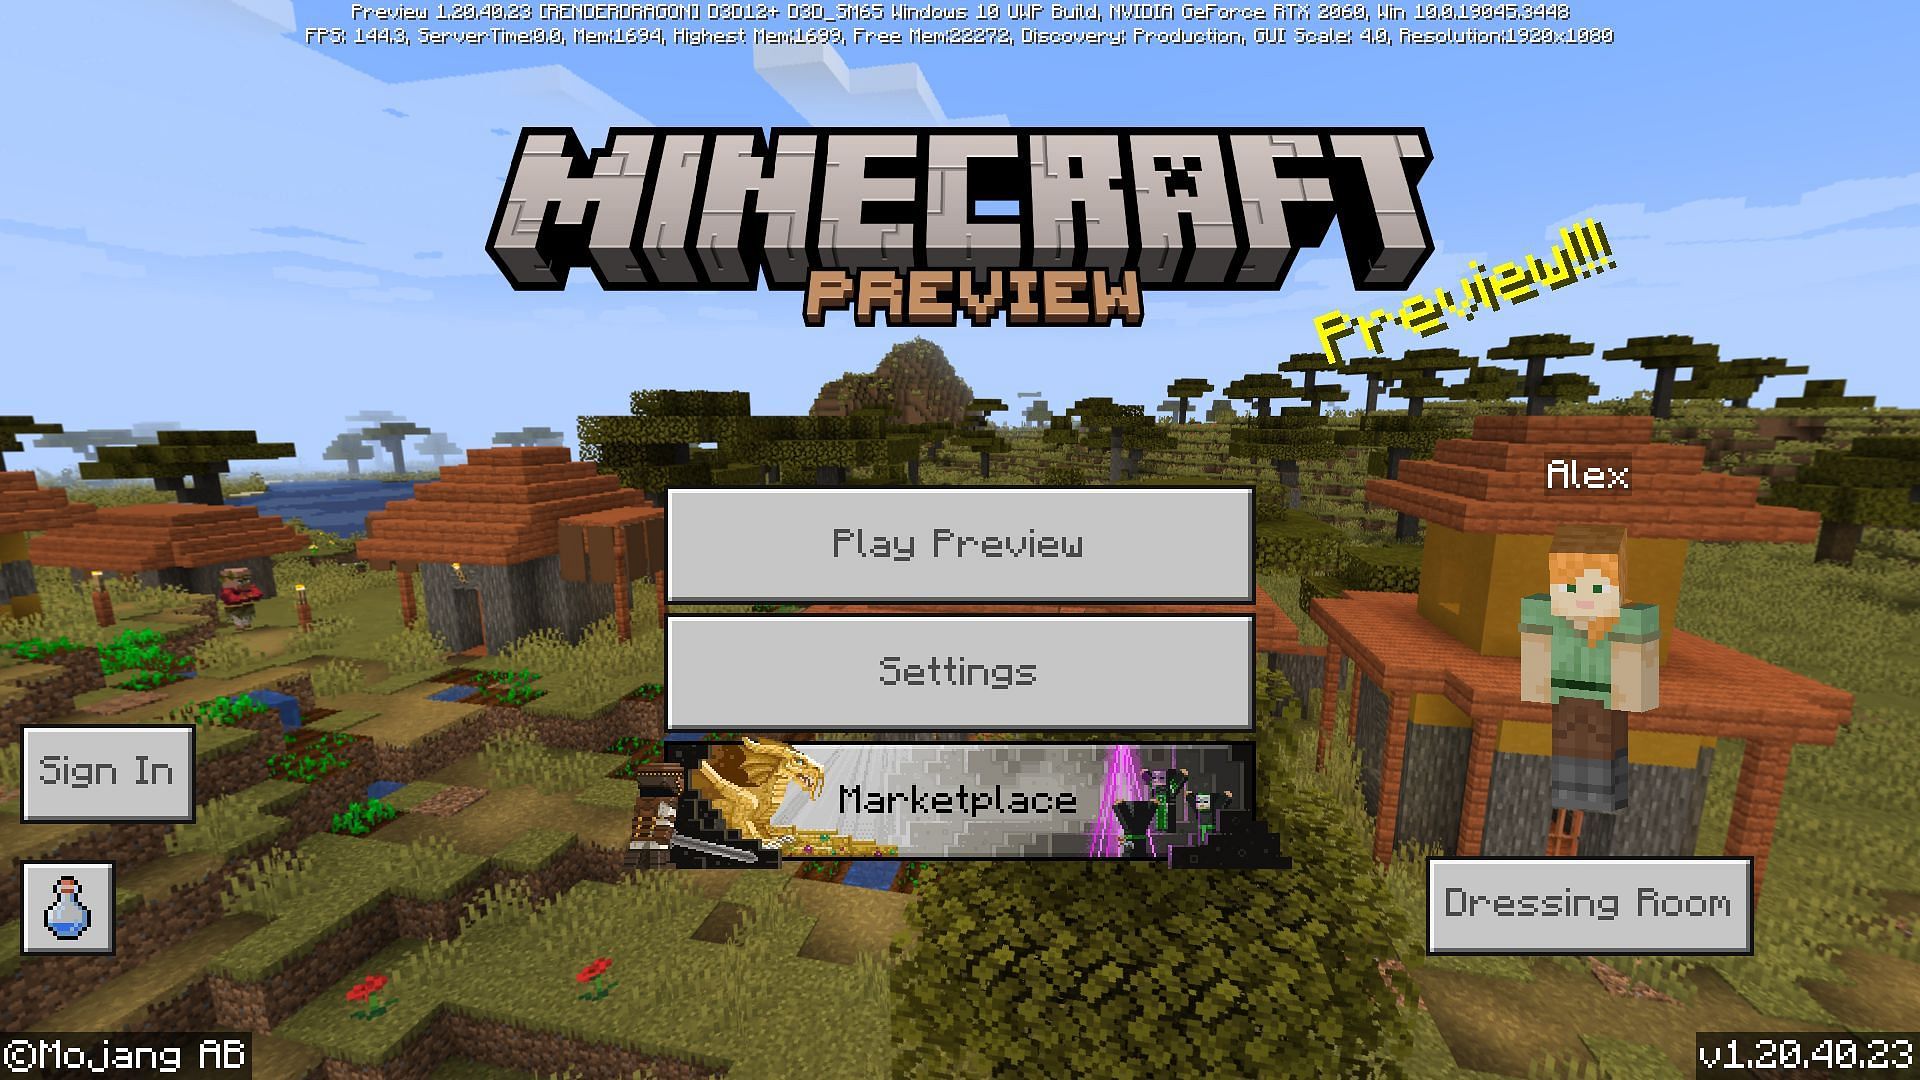 How to Play Minecraft Bedrock on a PC